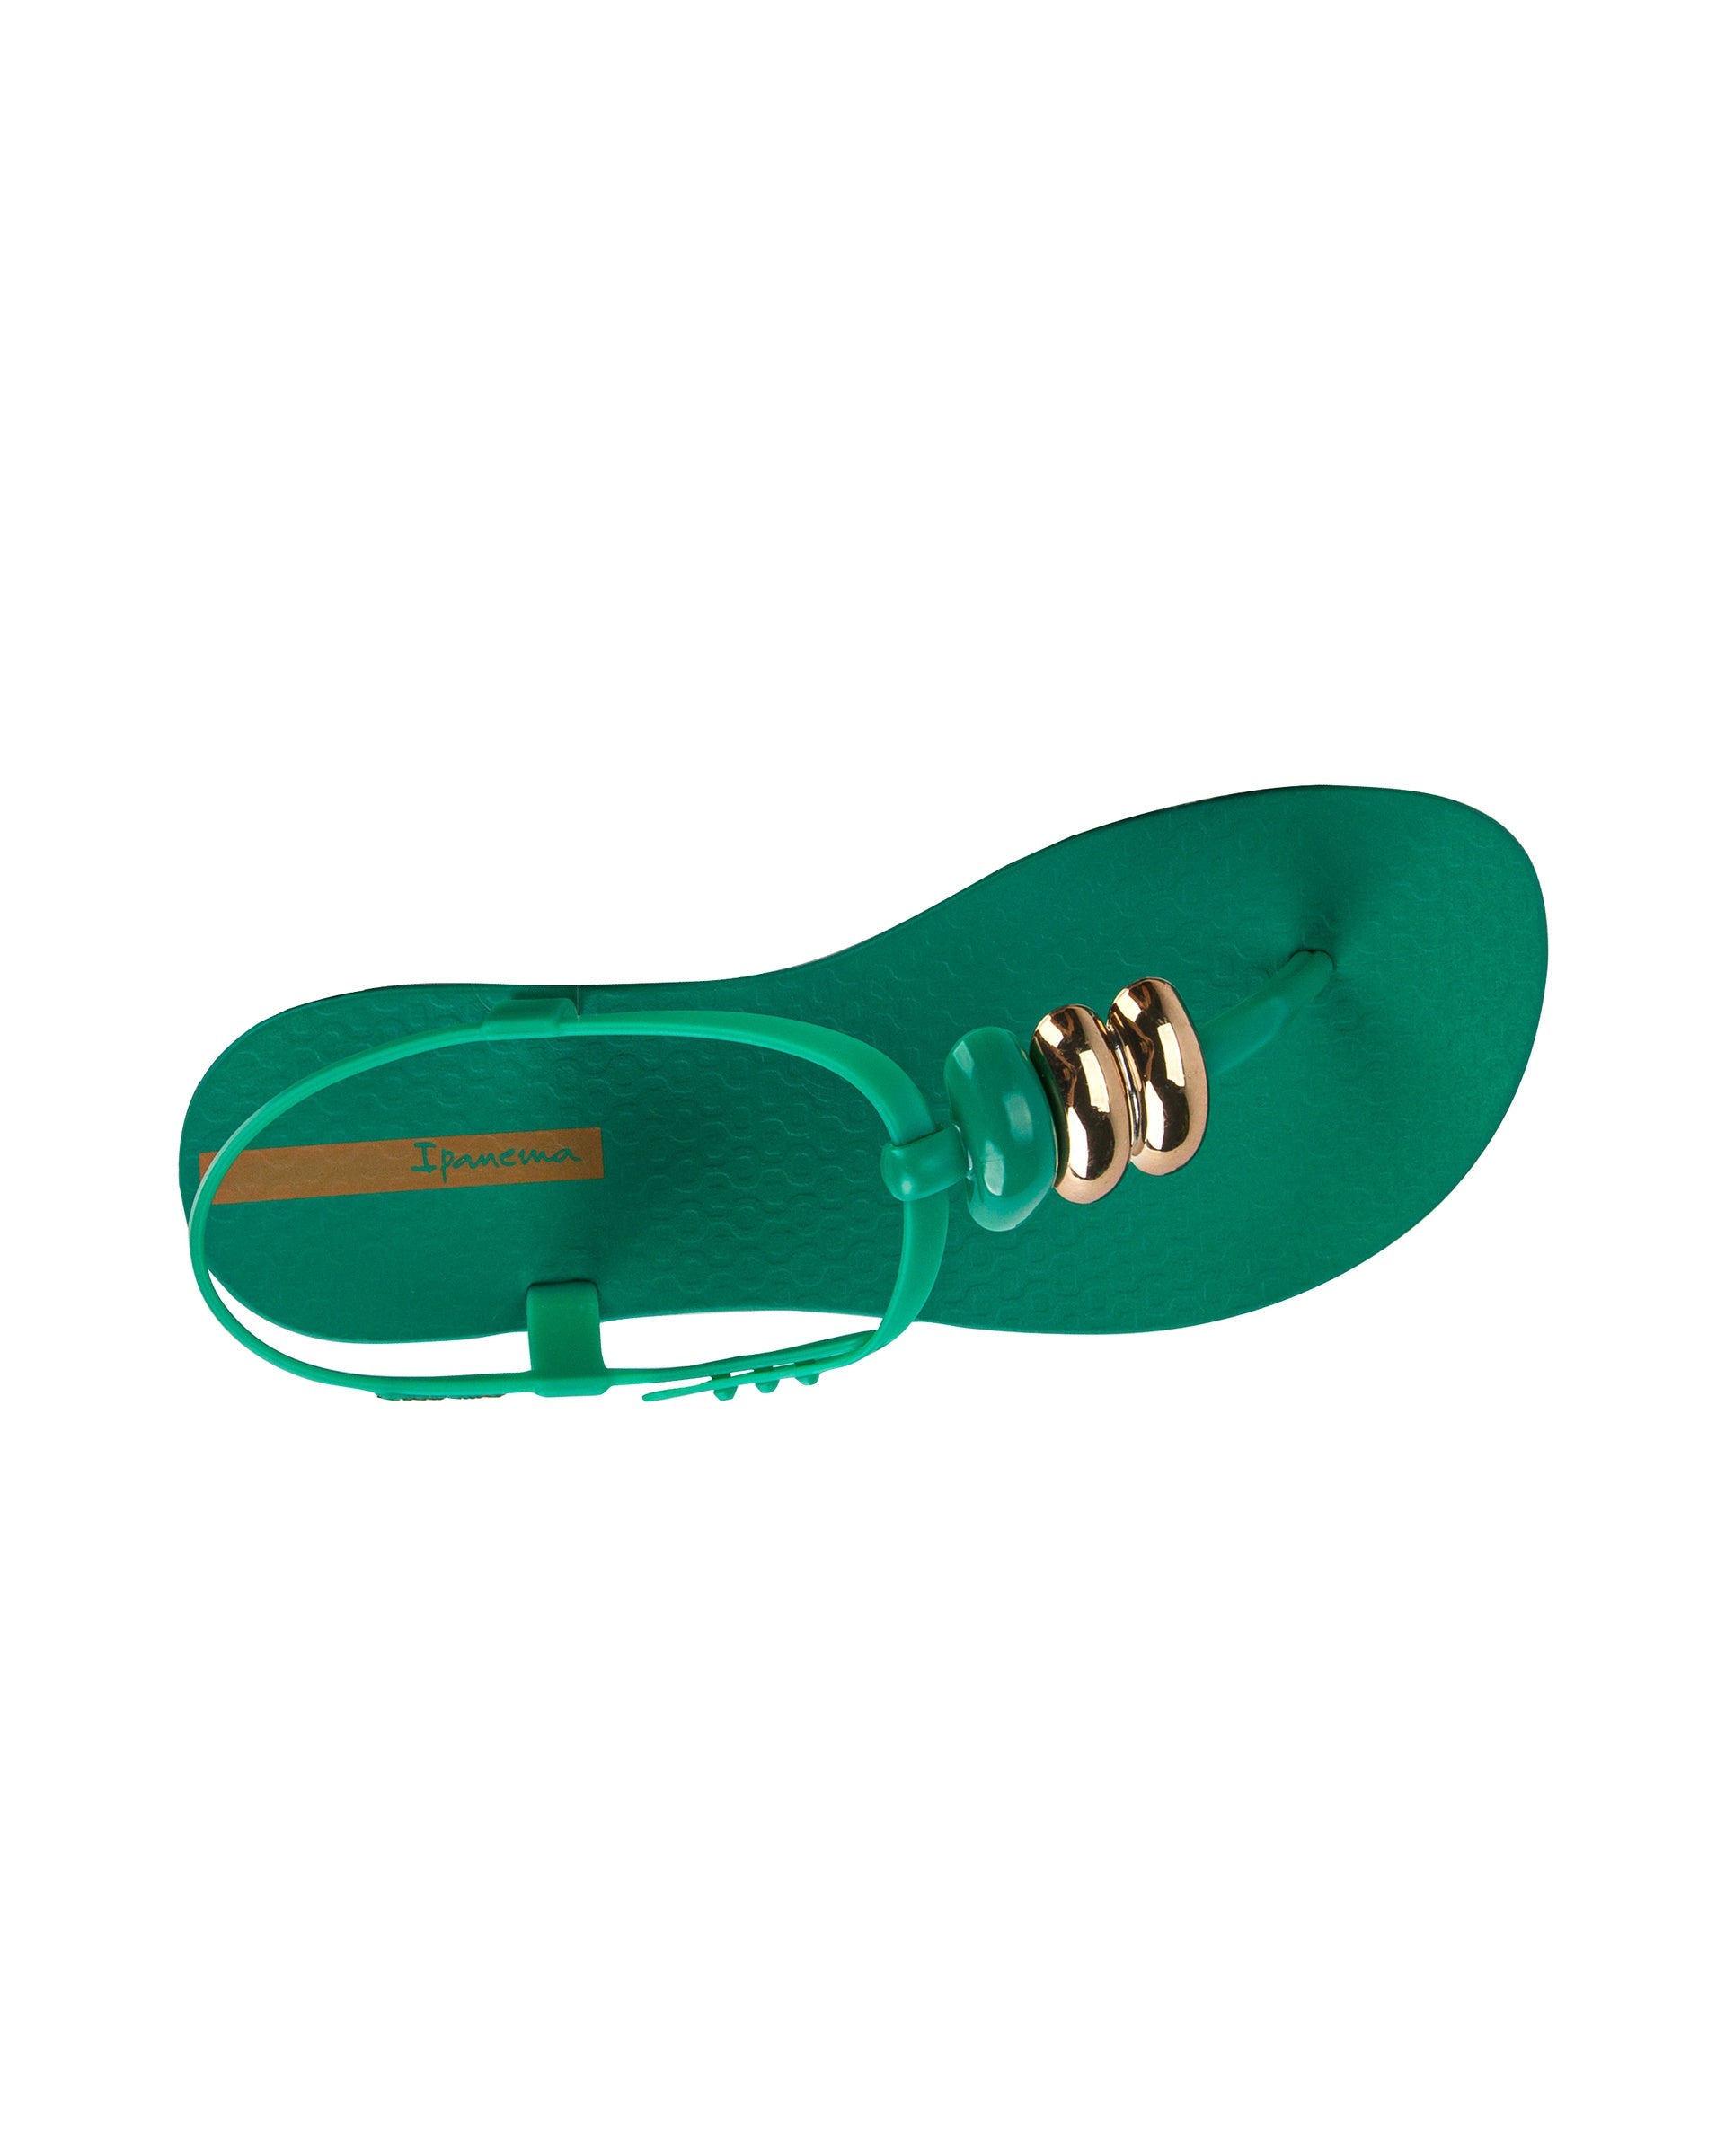 Top view of a green Ipanema Class women's sandal with 3 bubble baubles on the t-strap.